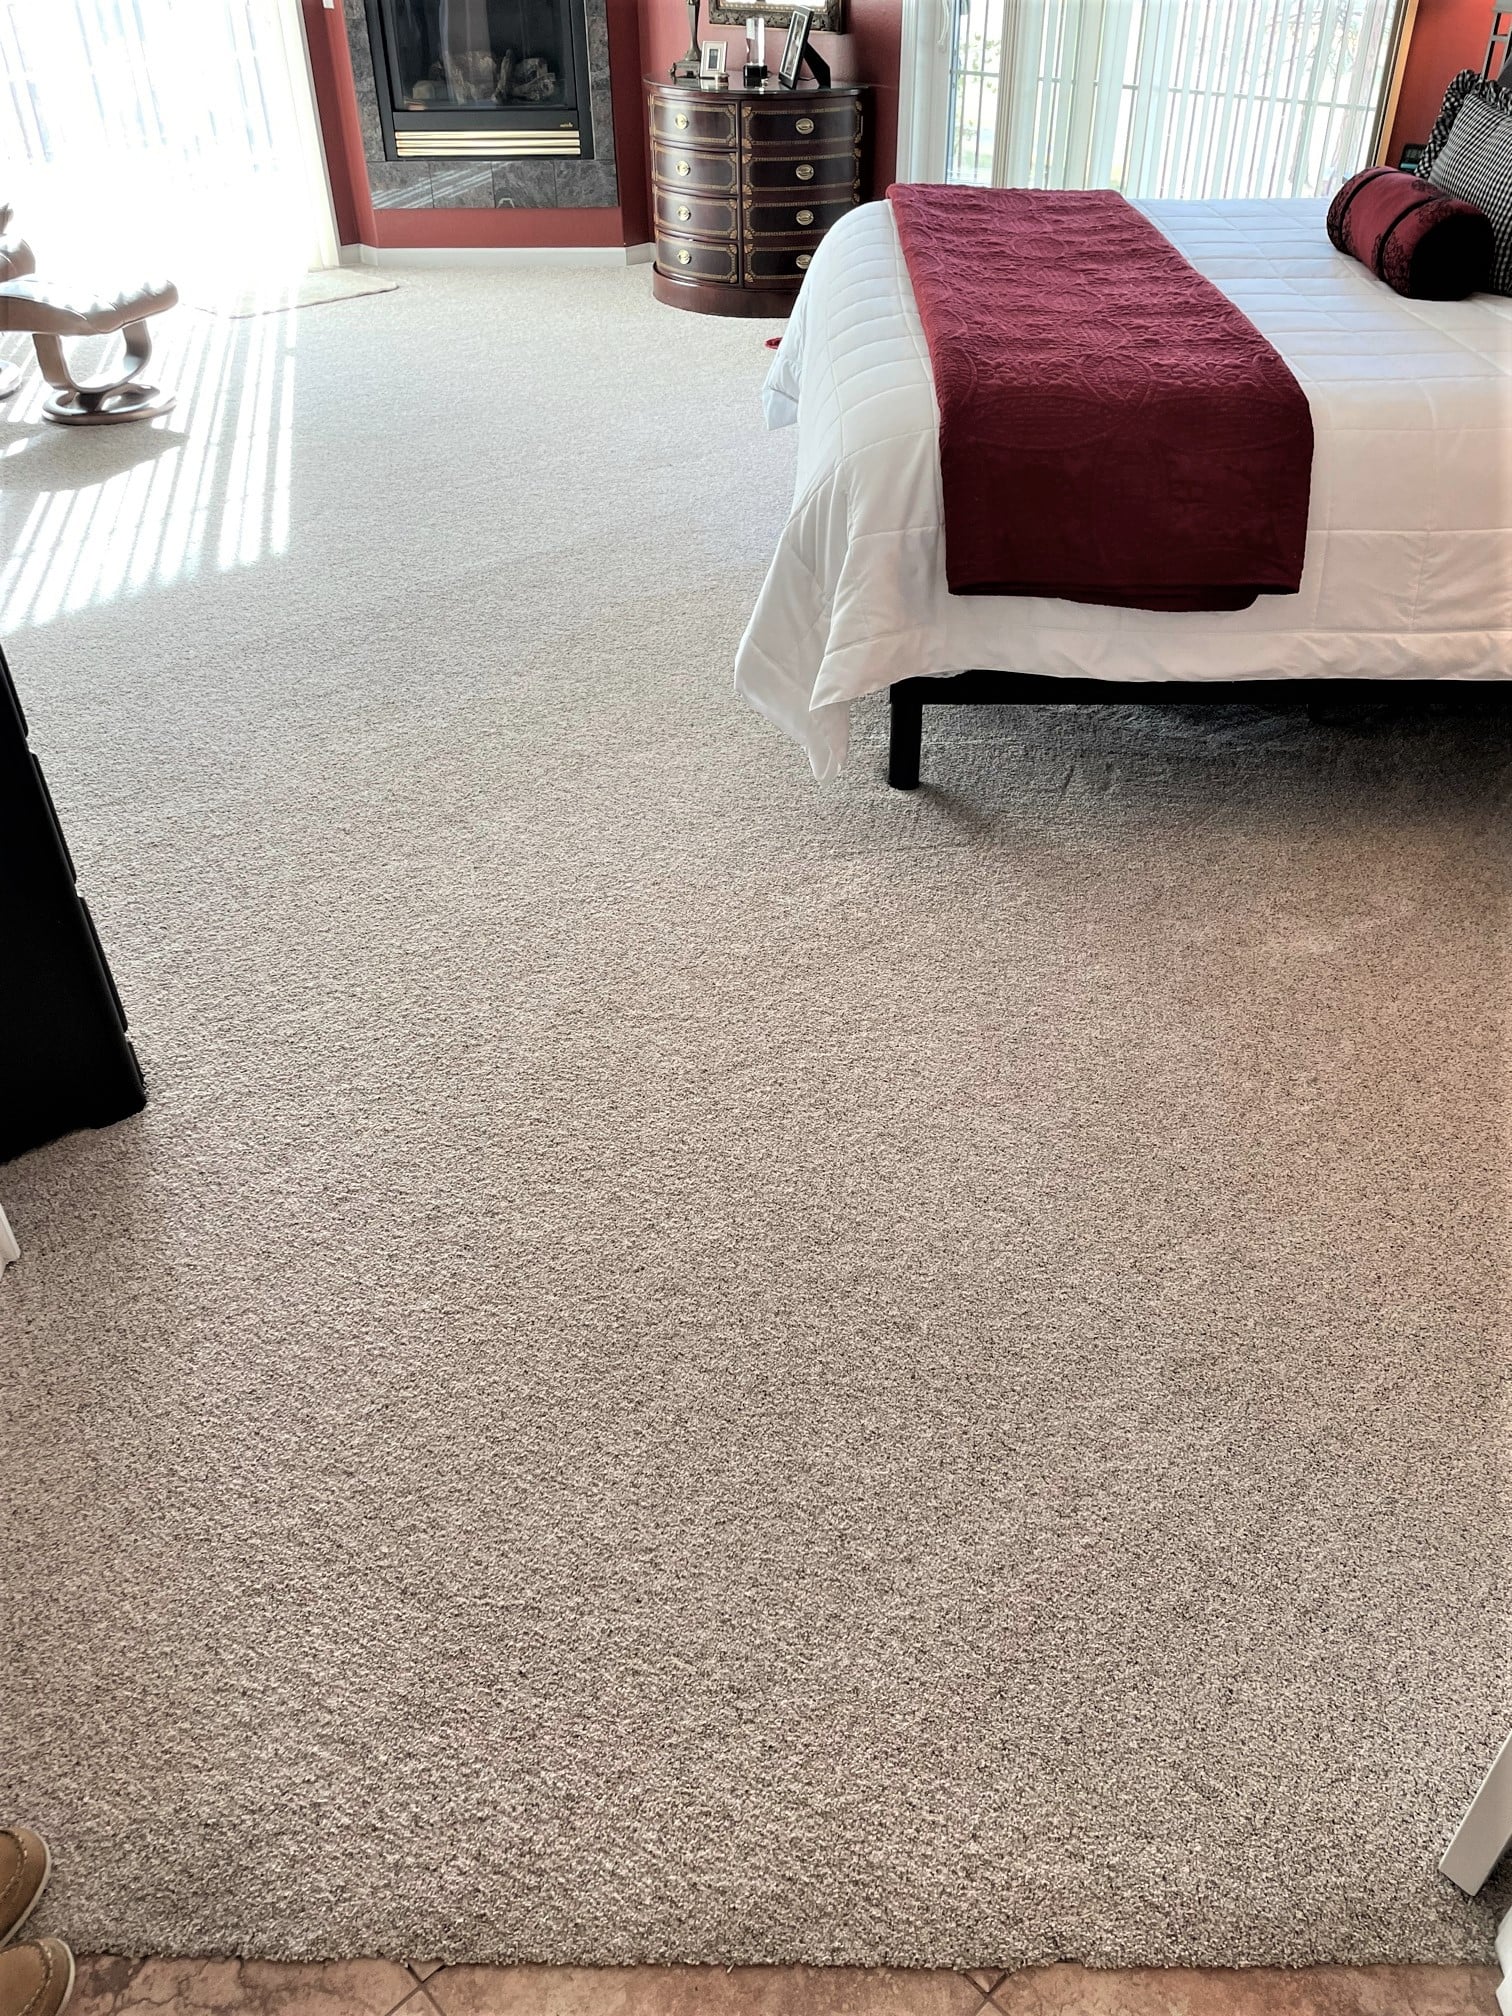 New Carpet in a recently renovated master bedroom. Flooring by Cardinal Flooring and Supply Medford and Klamath Falls.